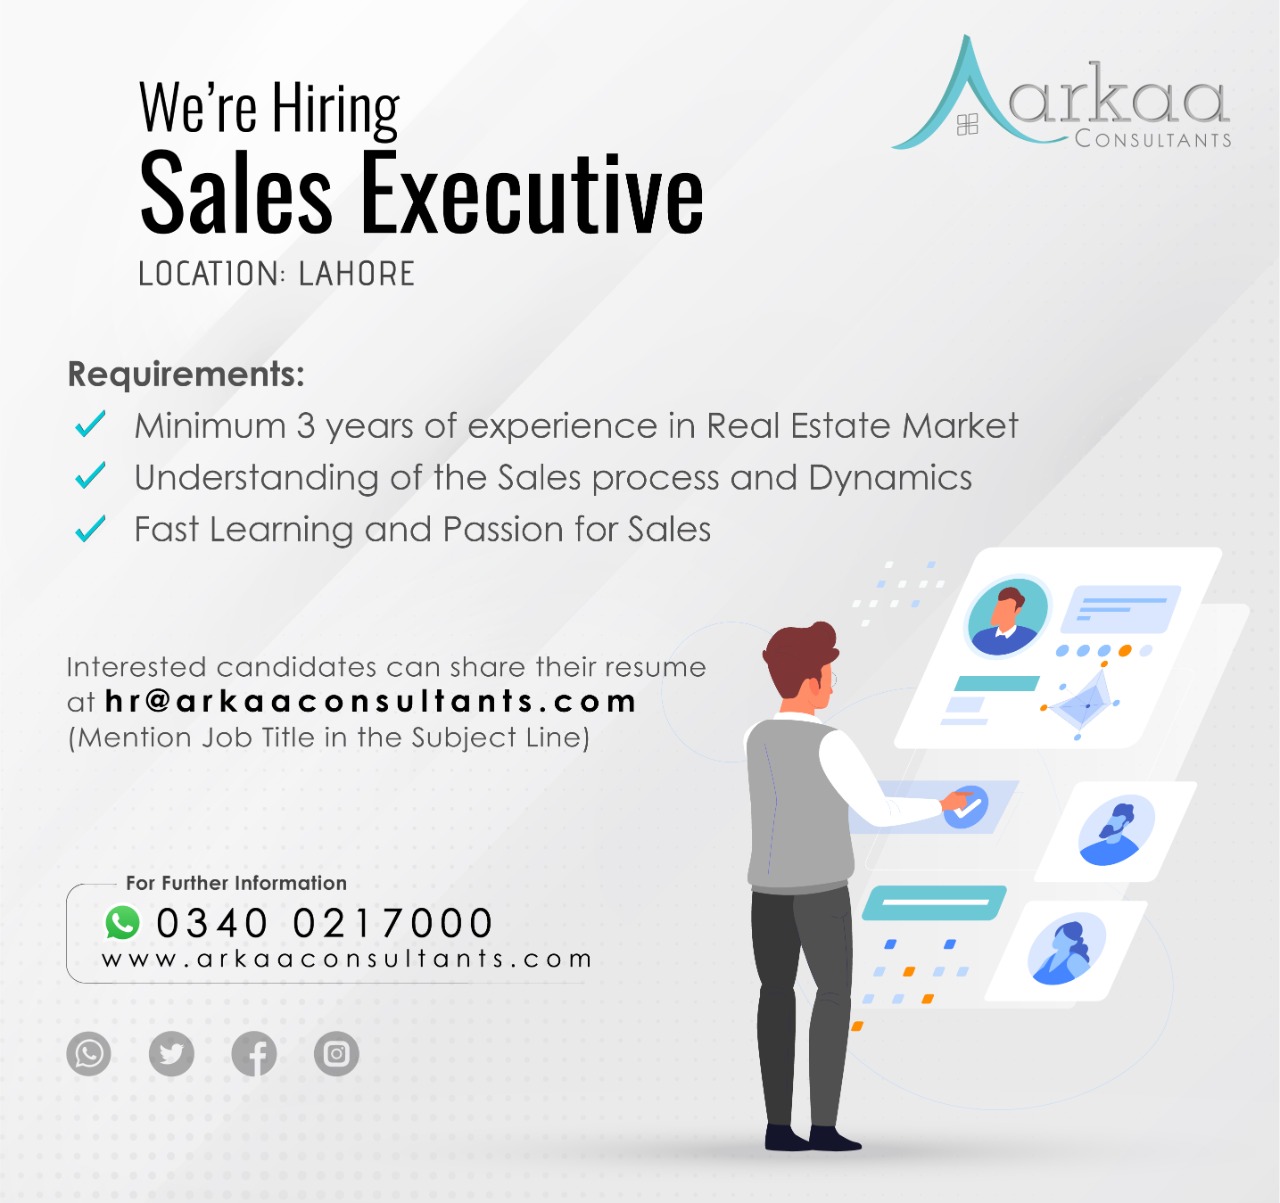 https://www.pakpositions.com/company/arkaa-consultants-1638185705